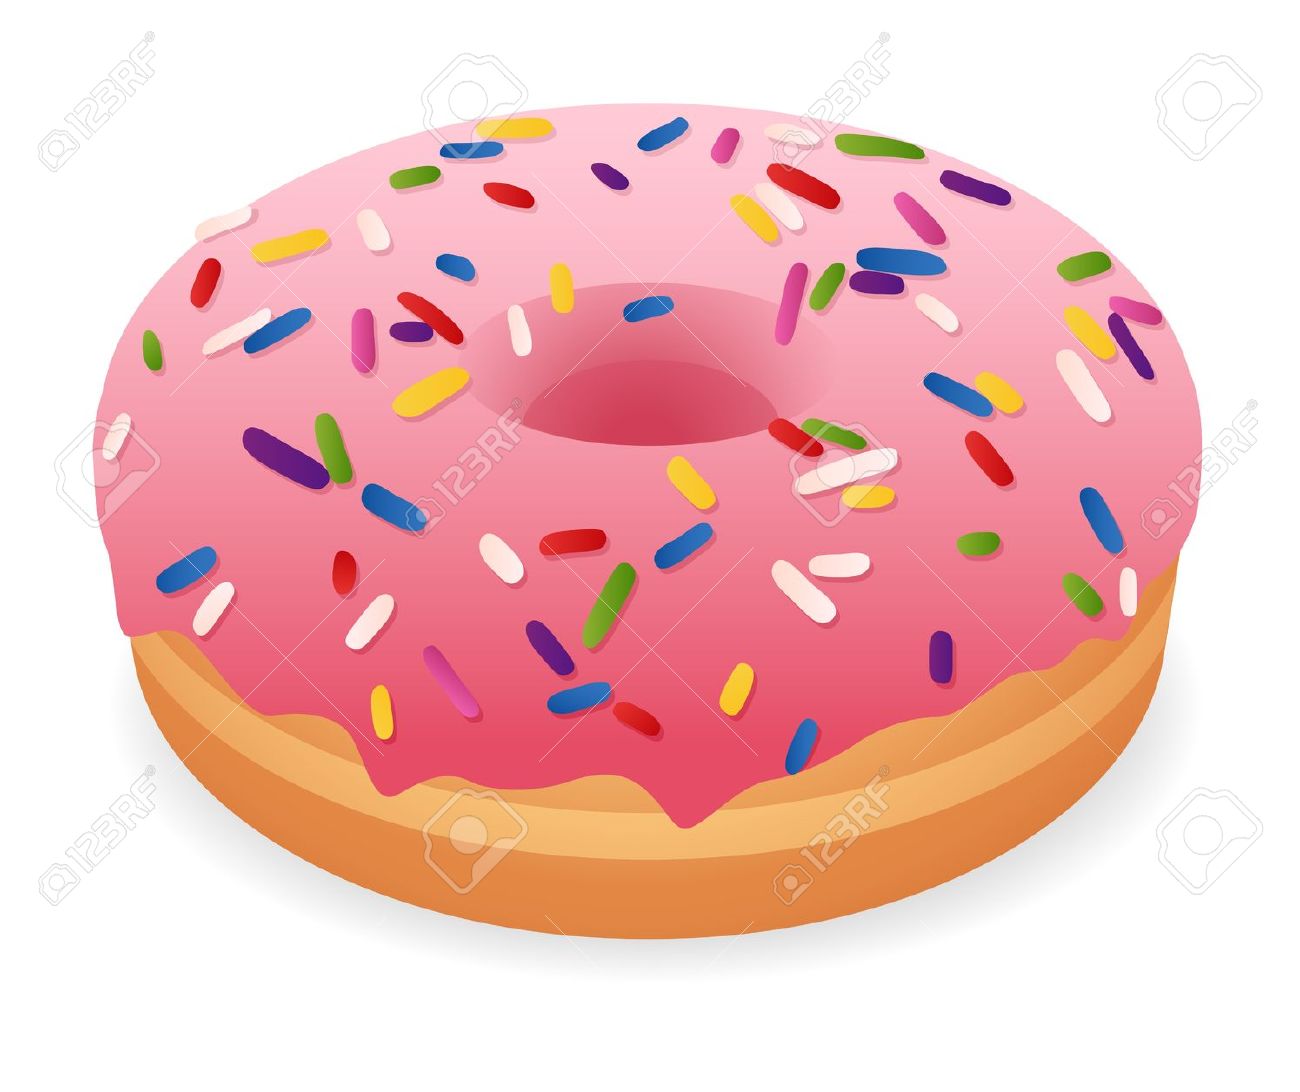 2753 Donut free clipart.